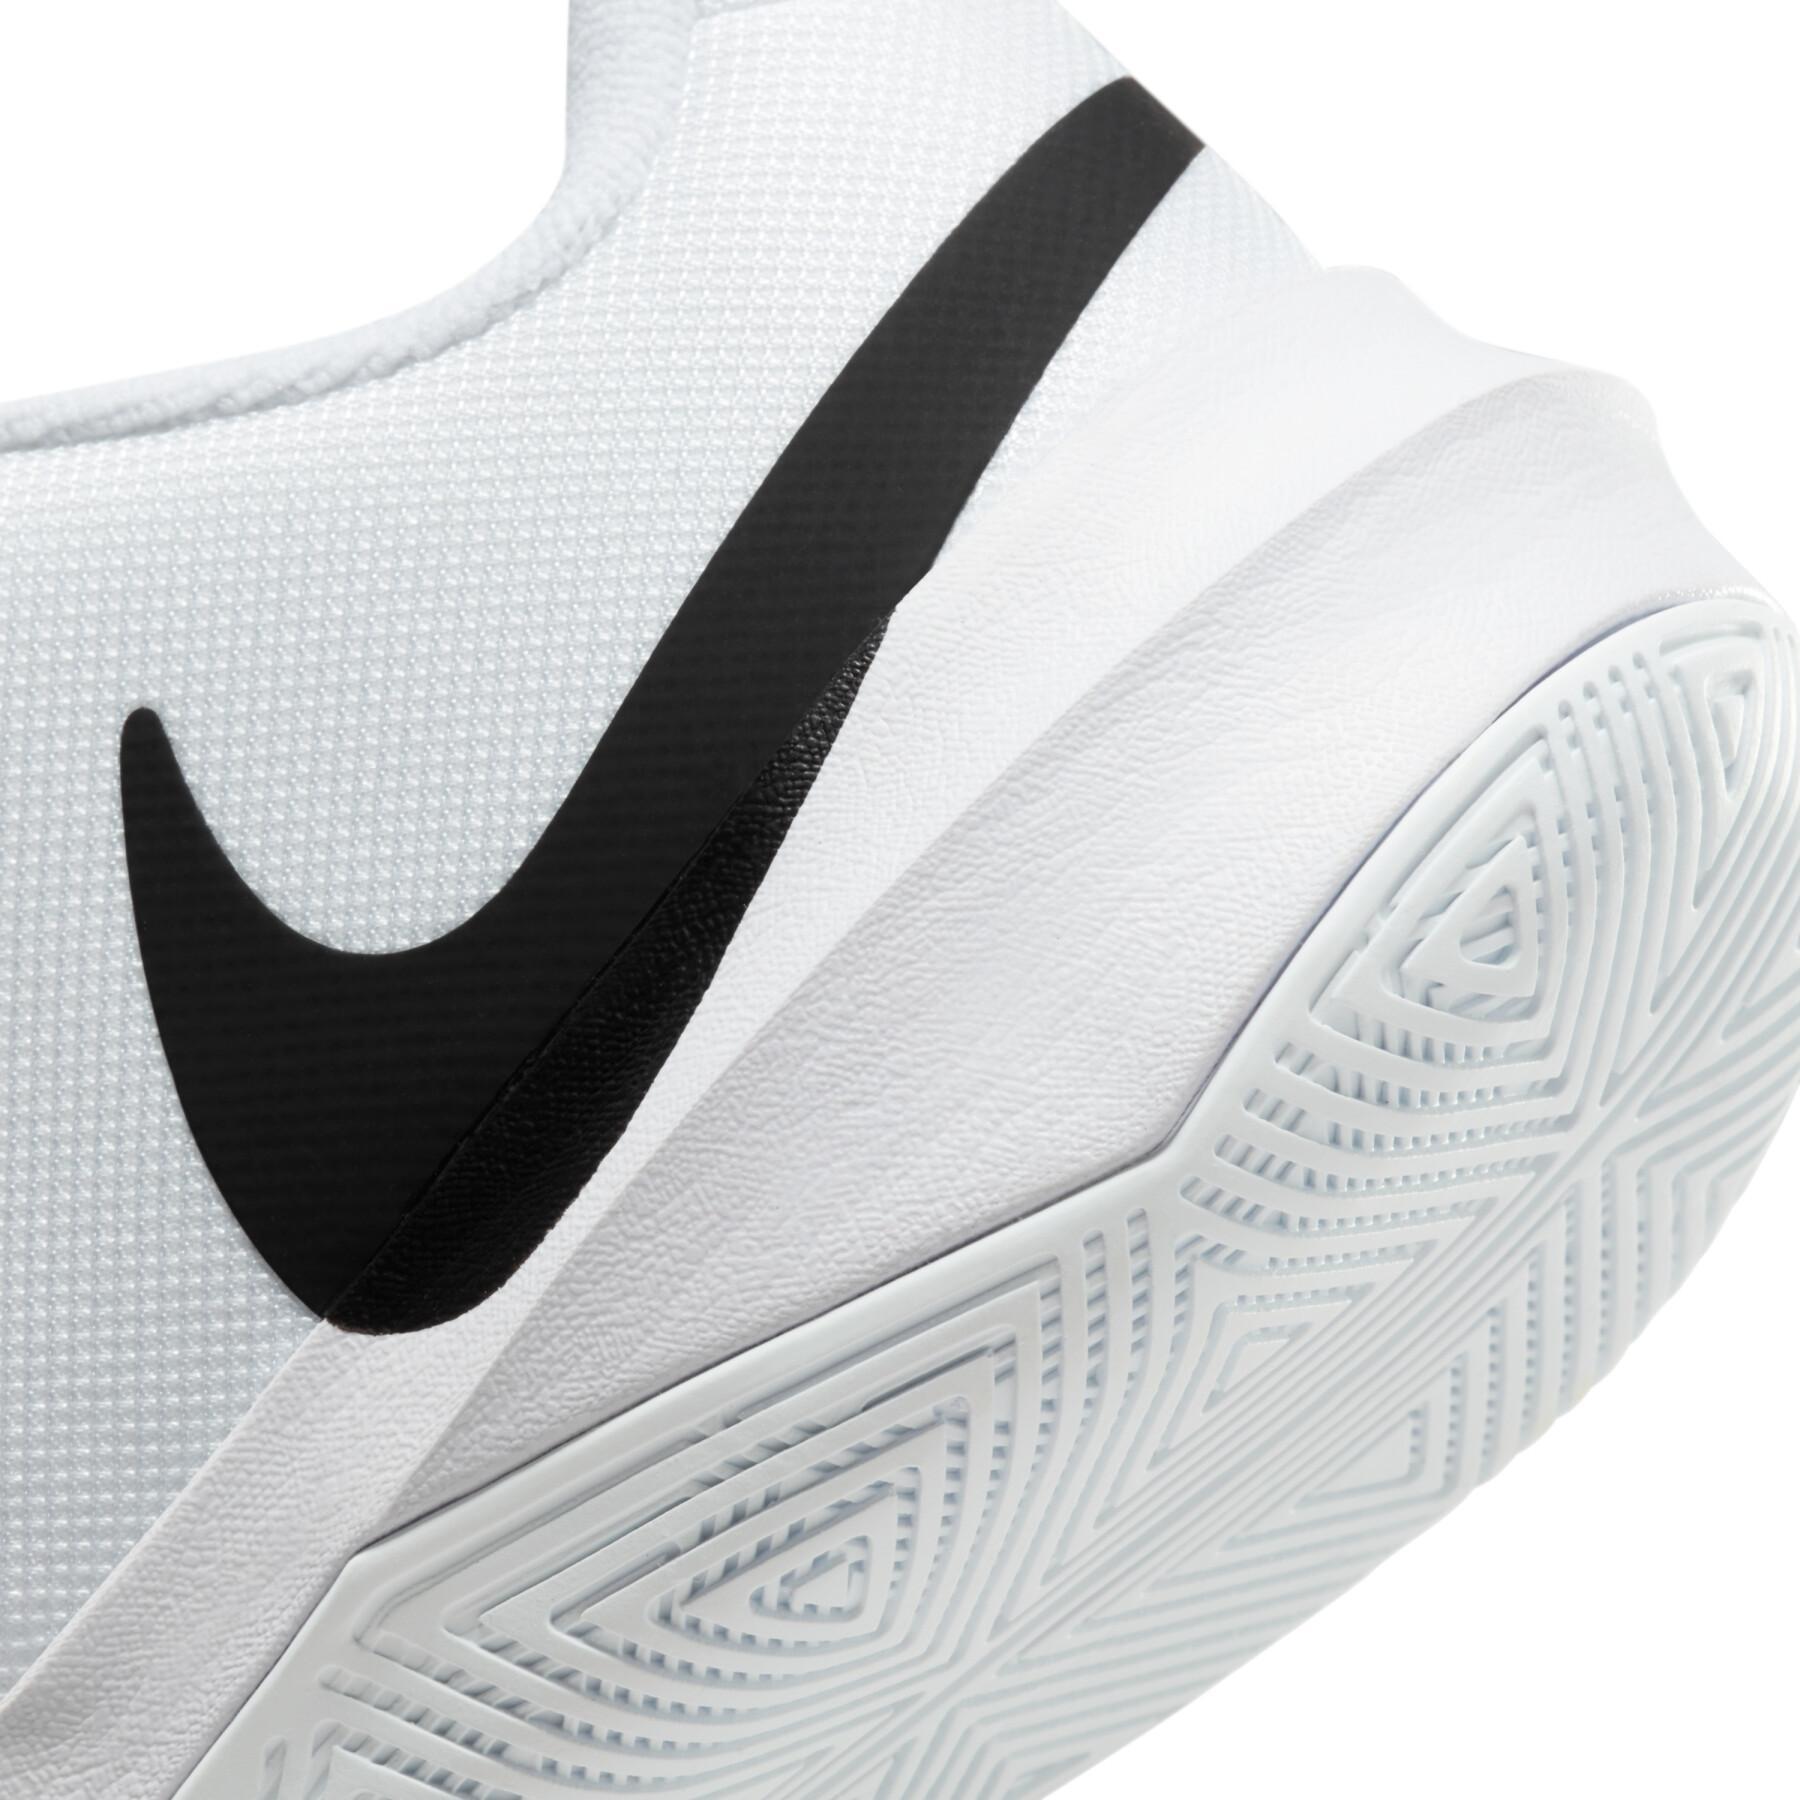 Shoes Nike Hyperspeed Court